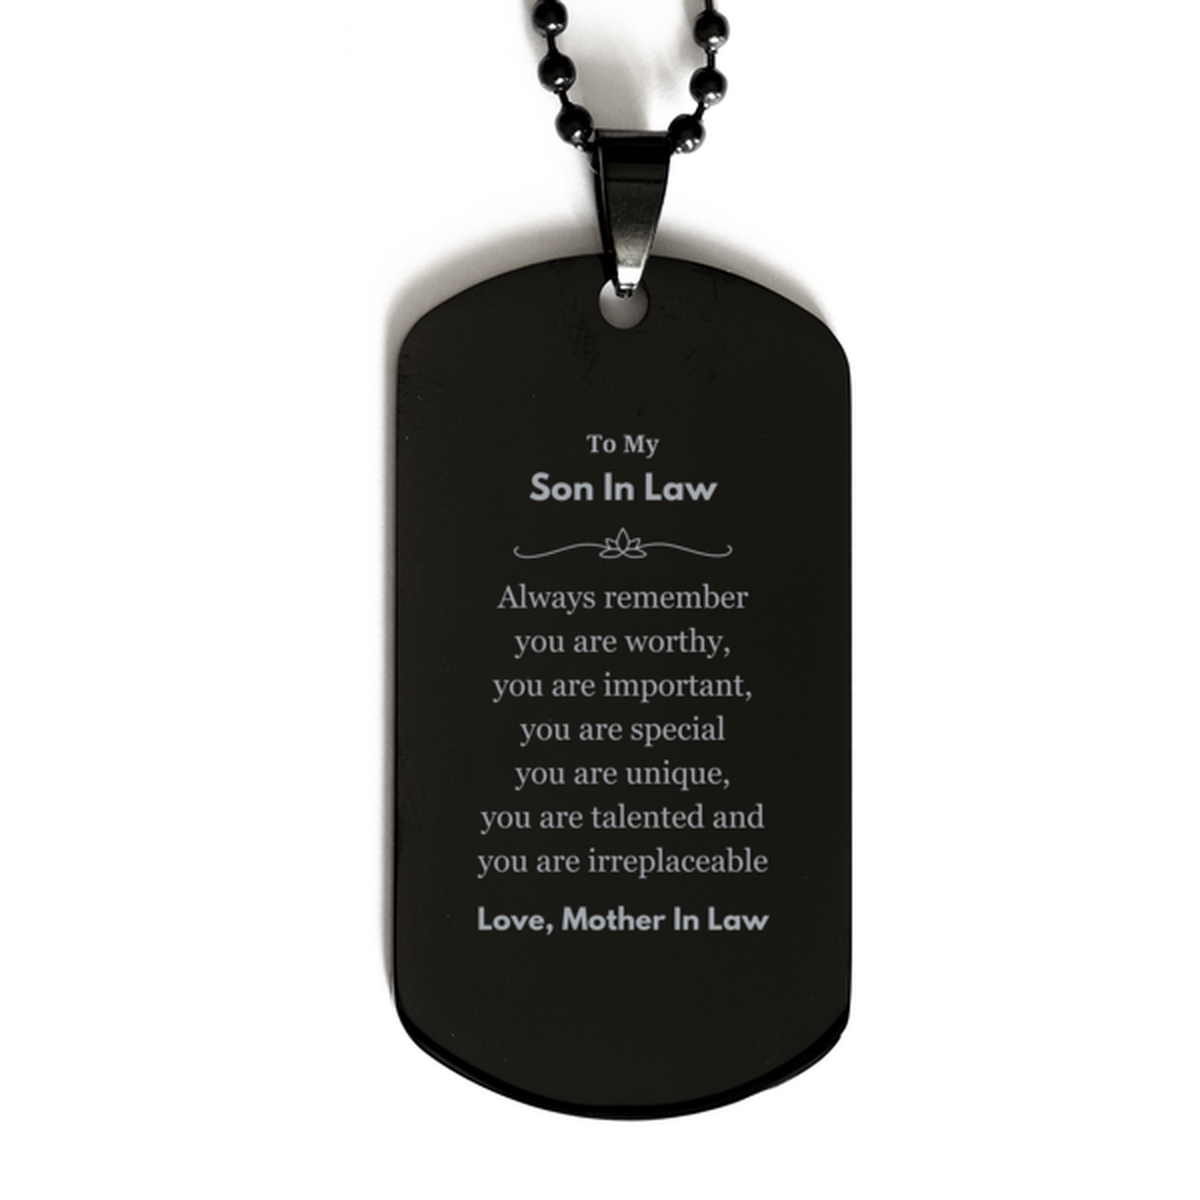 Son In Law Birthday Gifts from Mother In Law, Inspirational Black Dog Tag for Son In Law Christmas Graduation Gifts for Son In Law Always remember you are worthy, you are important. Love, Mother In Law